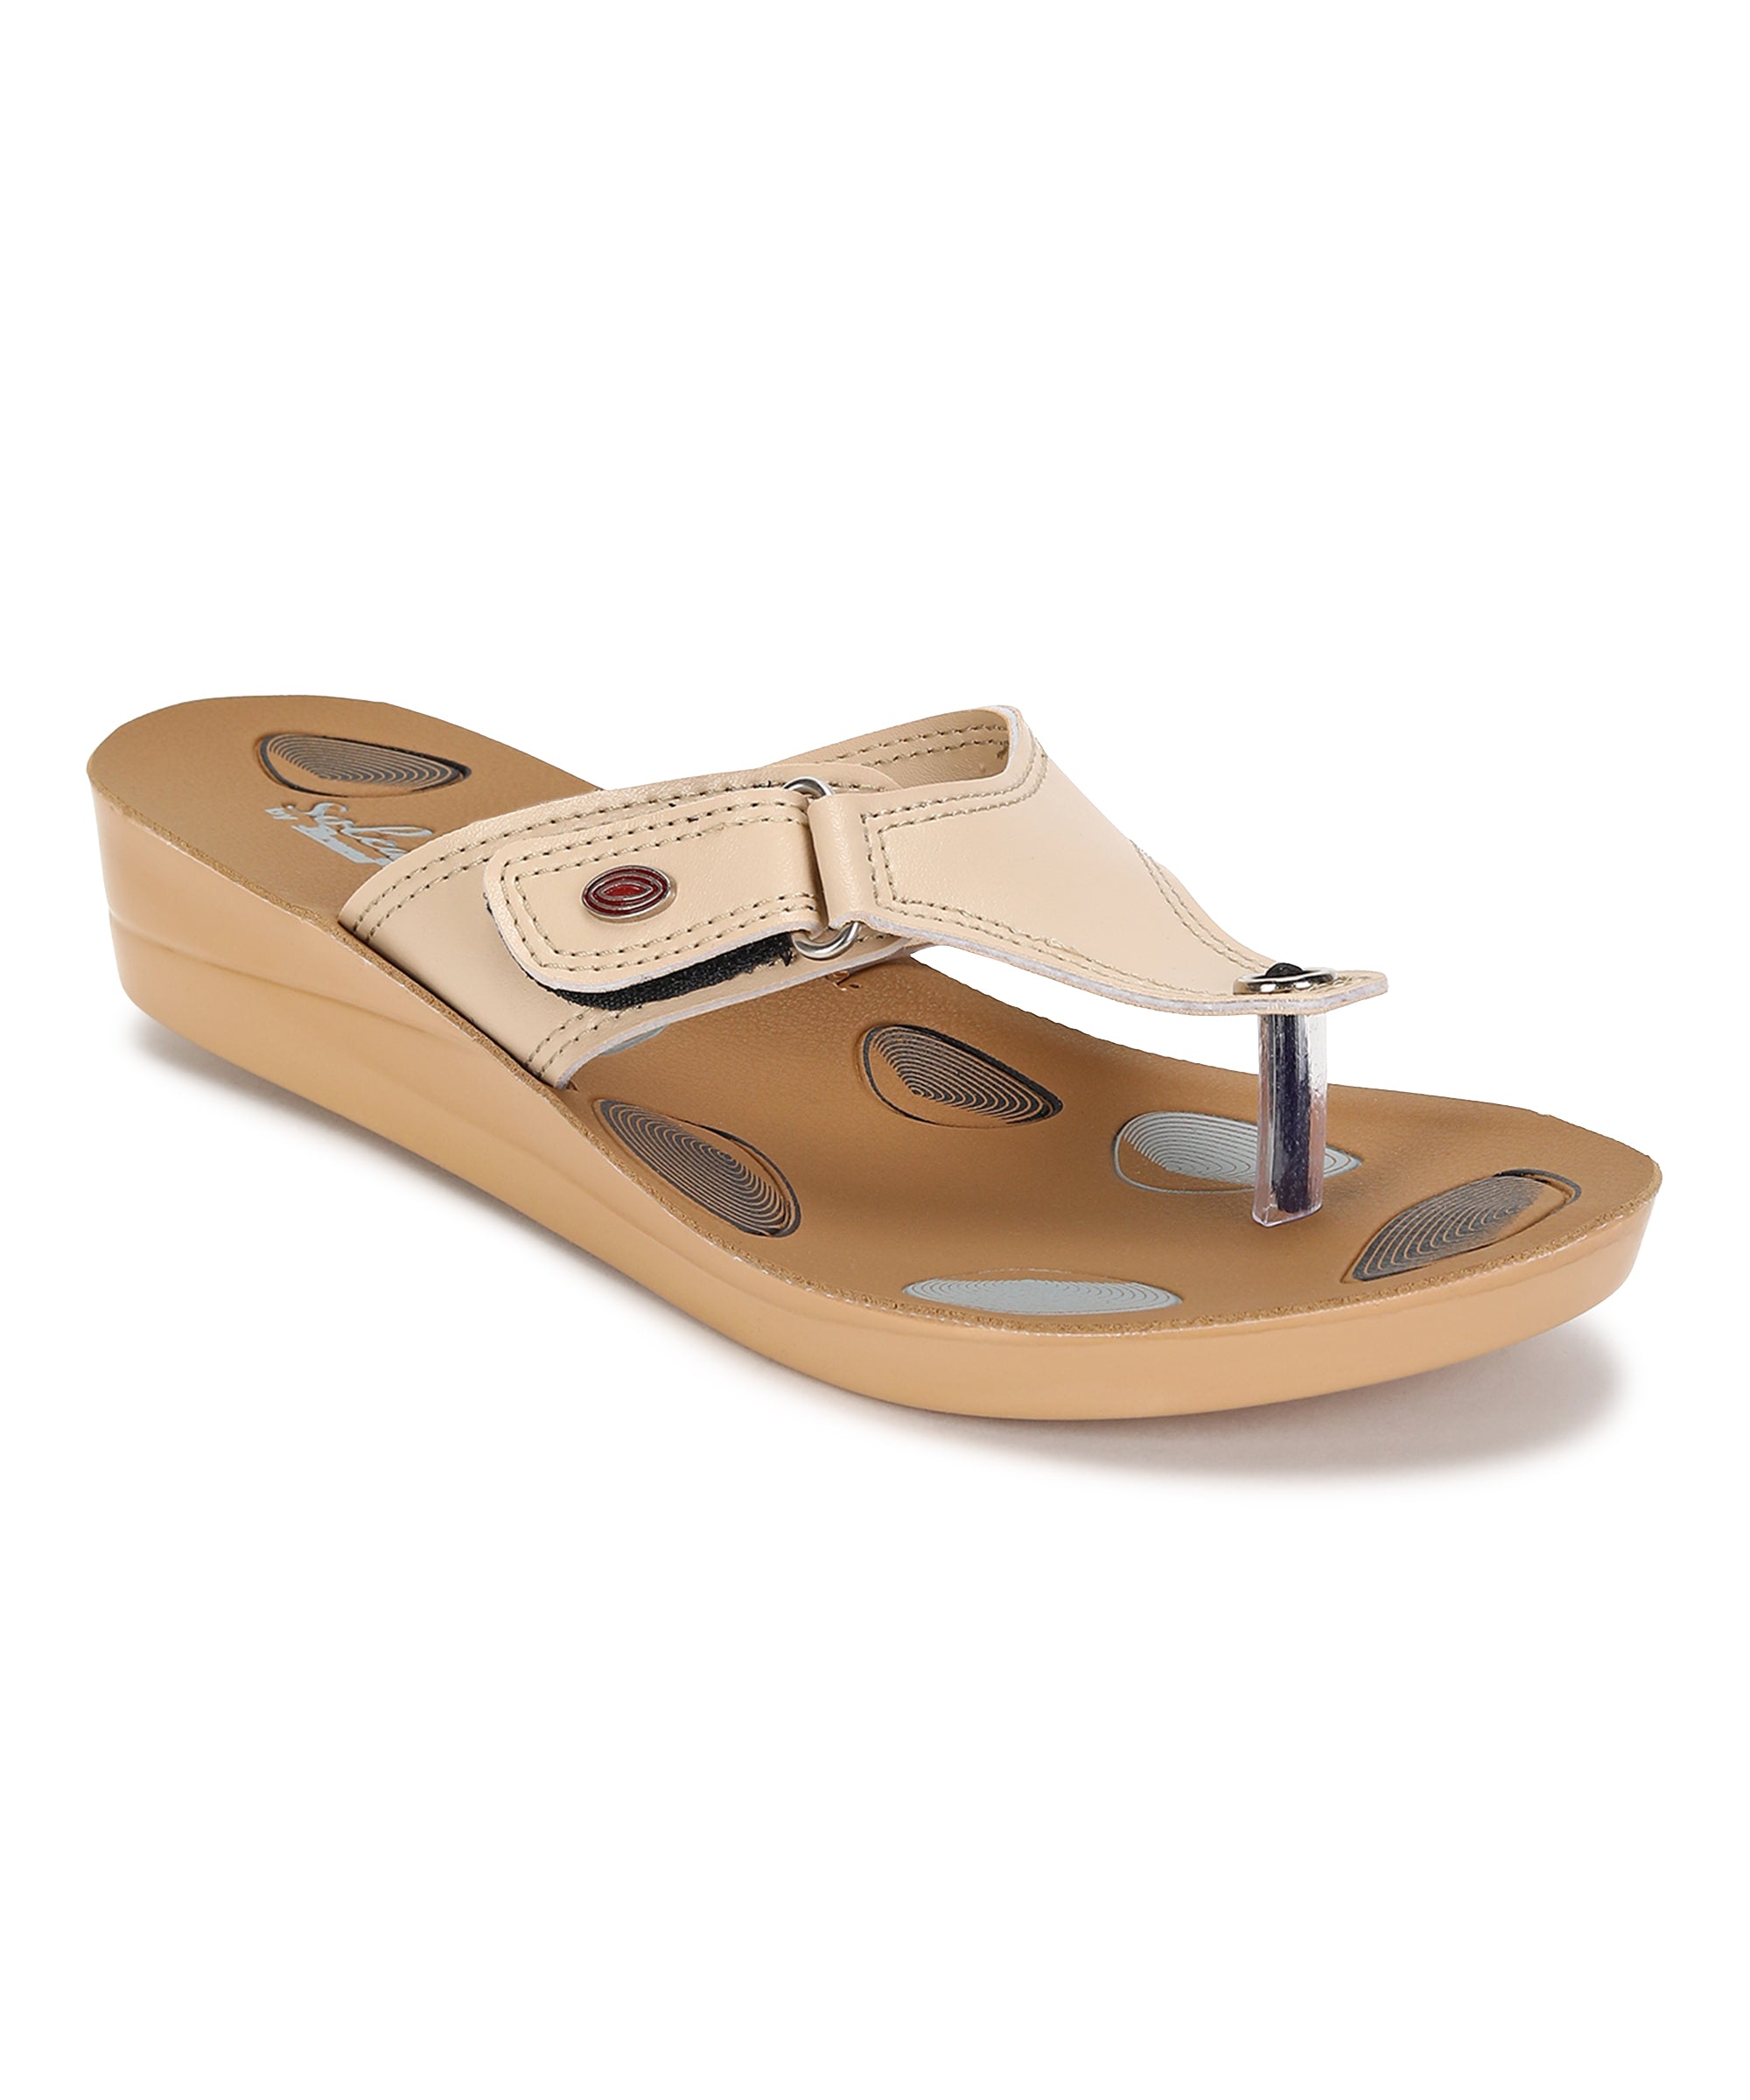 Paragon  PUK7008L Women Sandals | Casual &amp; Formal Sandals | Stylish, Comfortable &amp; Durable | For Daily &amp; Occasion Wear